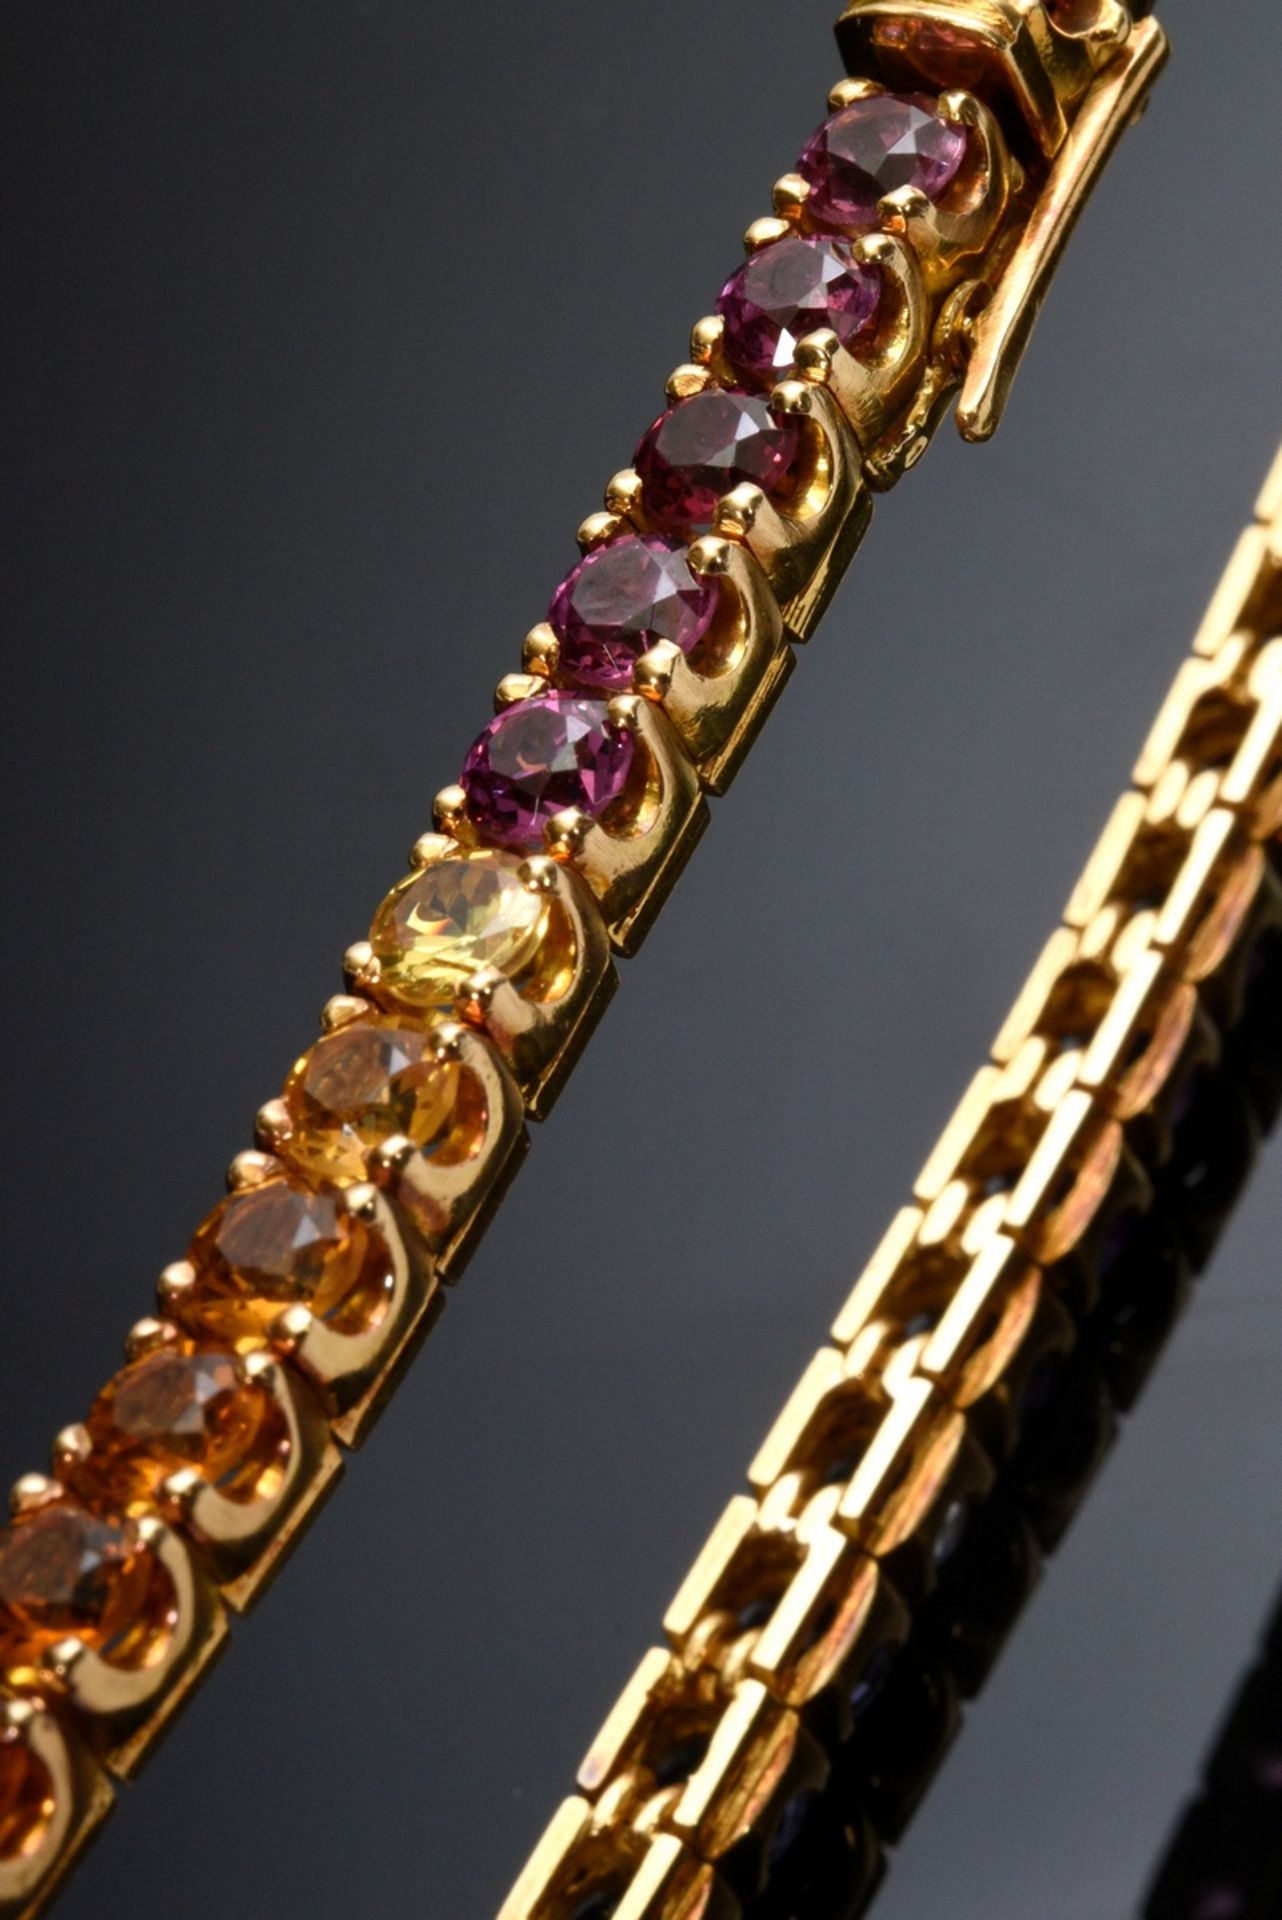 Modern yellow gold 800 rainbow rivière or tennis bracelet with amethysts, topazes, tourmalines, per - Image 3 of 4